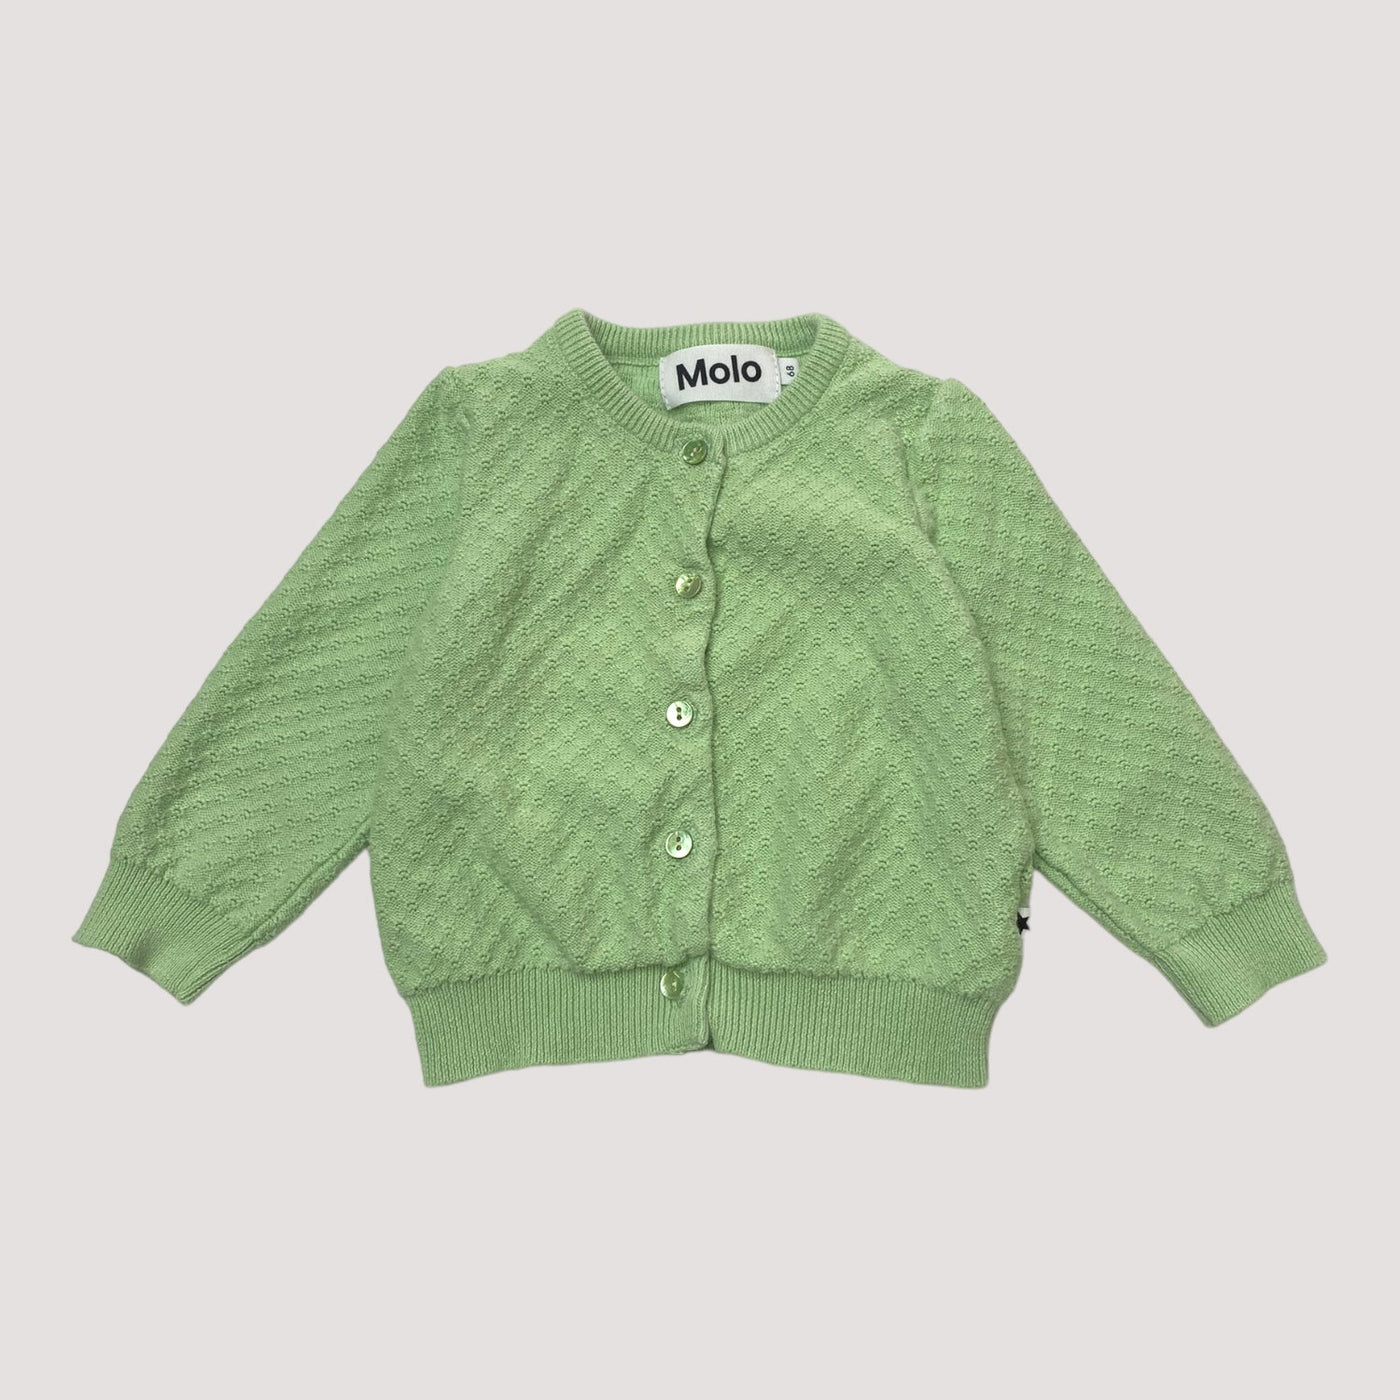 Molo knitted cardigan, apple sorbet | 68cm